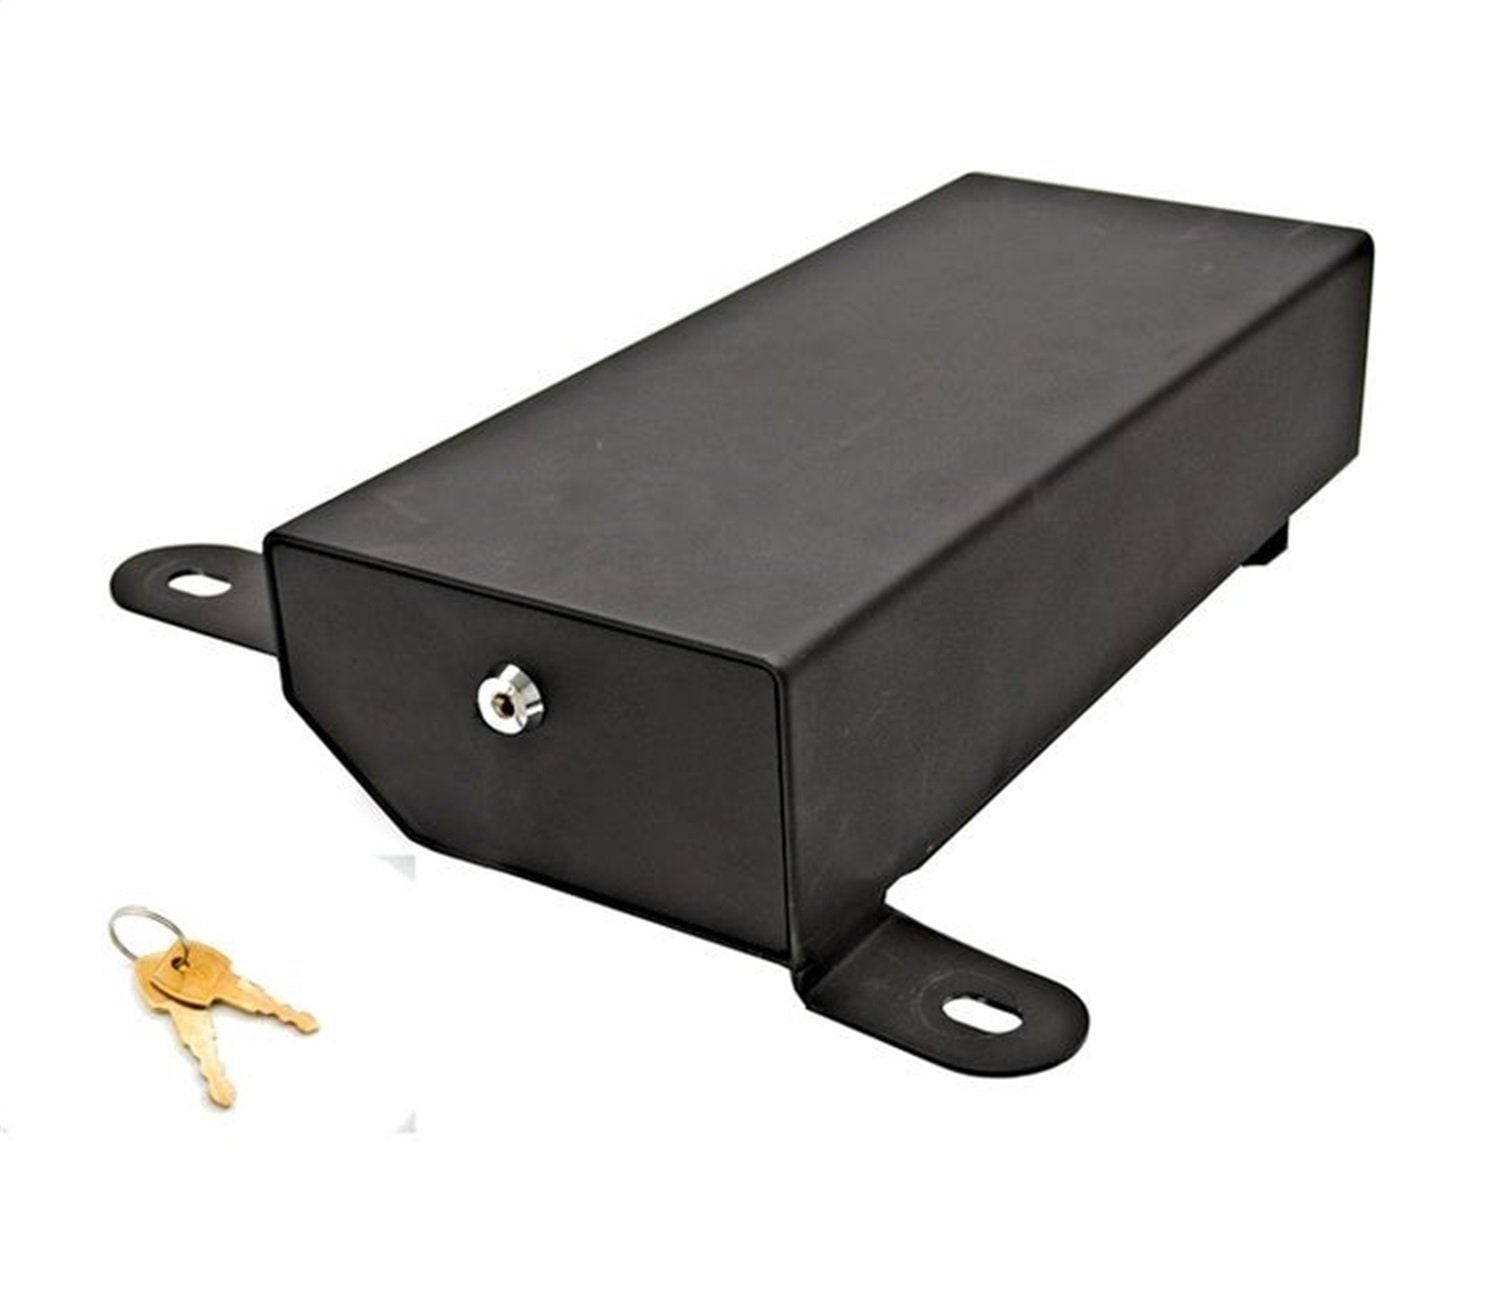 Accessories - Bestop 42640-01 HighRock 4x4 Under Seat Lock Box for 2007-2018 Wrangler JK, Driver - Used - 2007 to 2018 Jeep Wrangler - Nogales, AZ 85621, United States